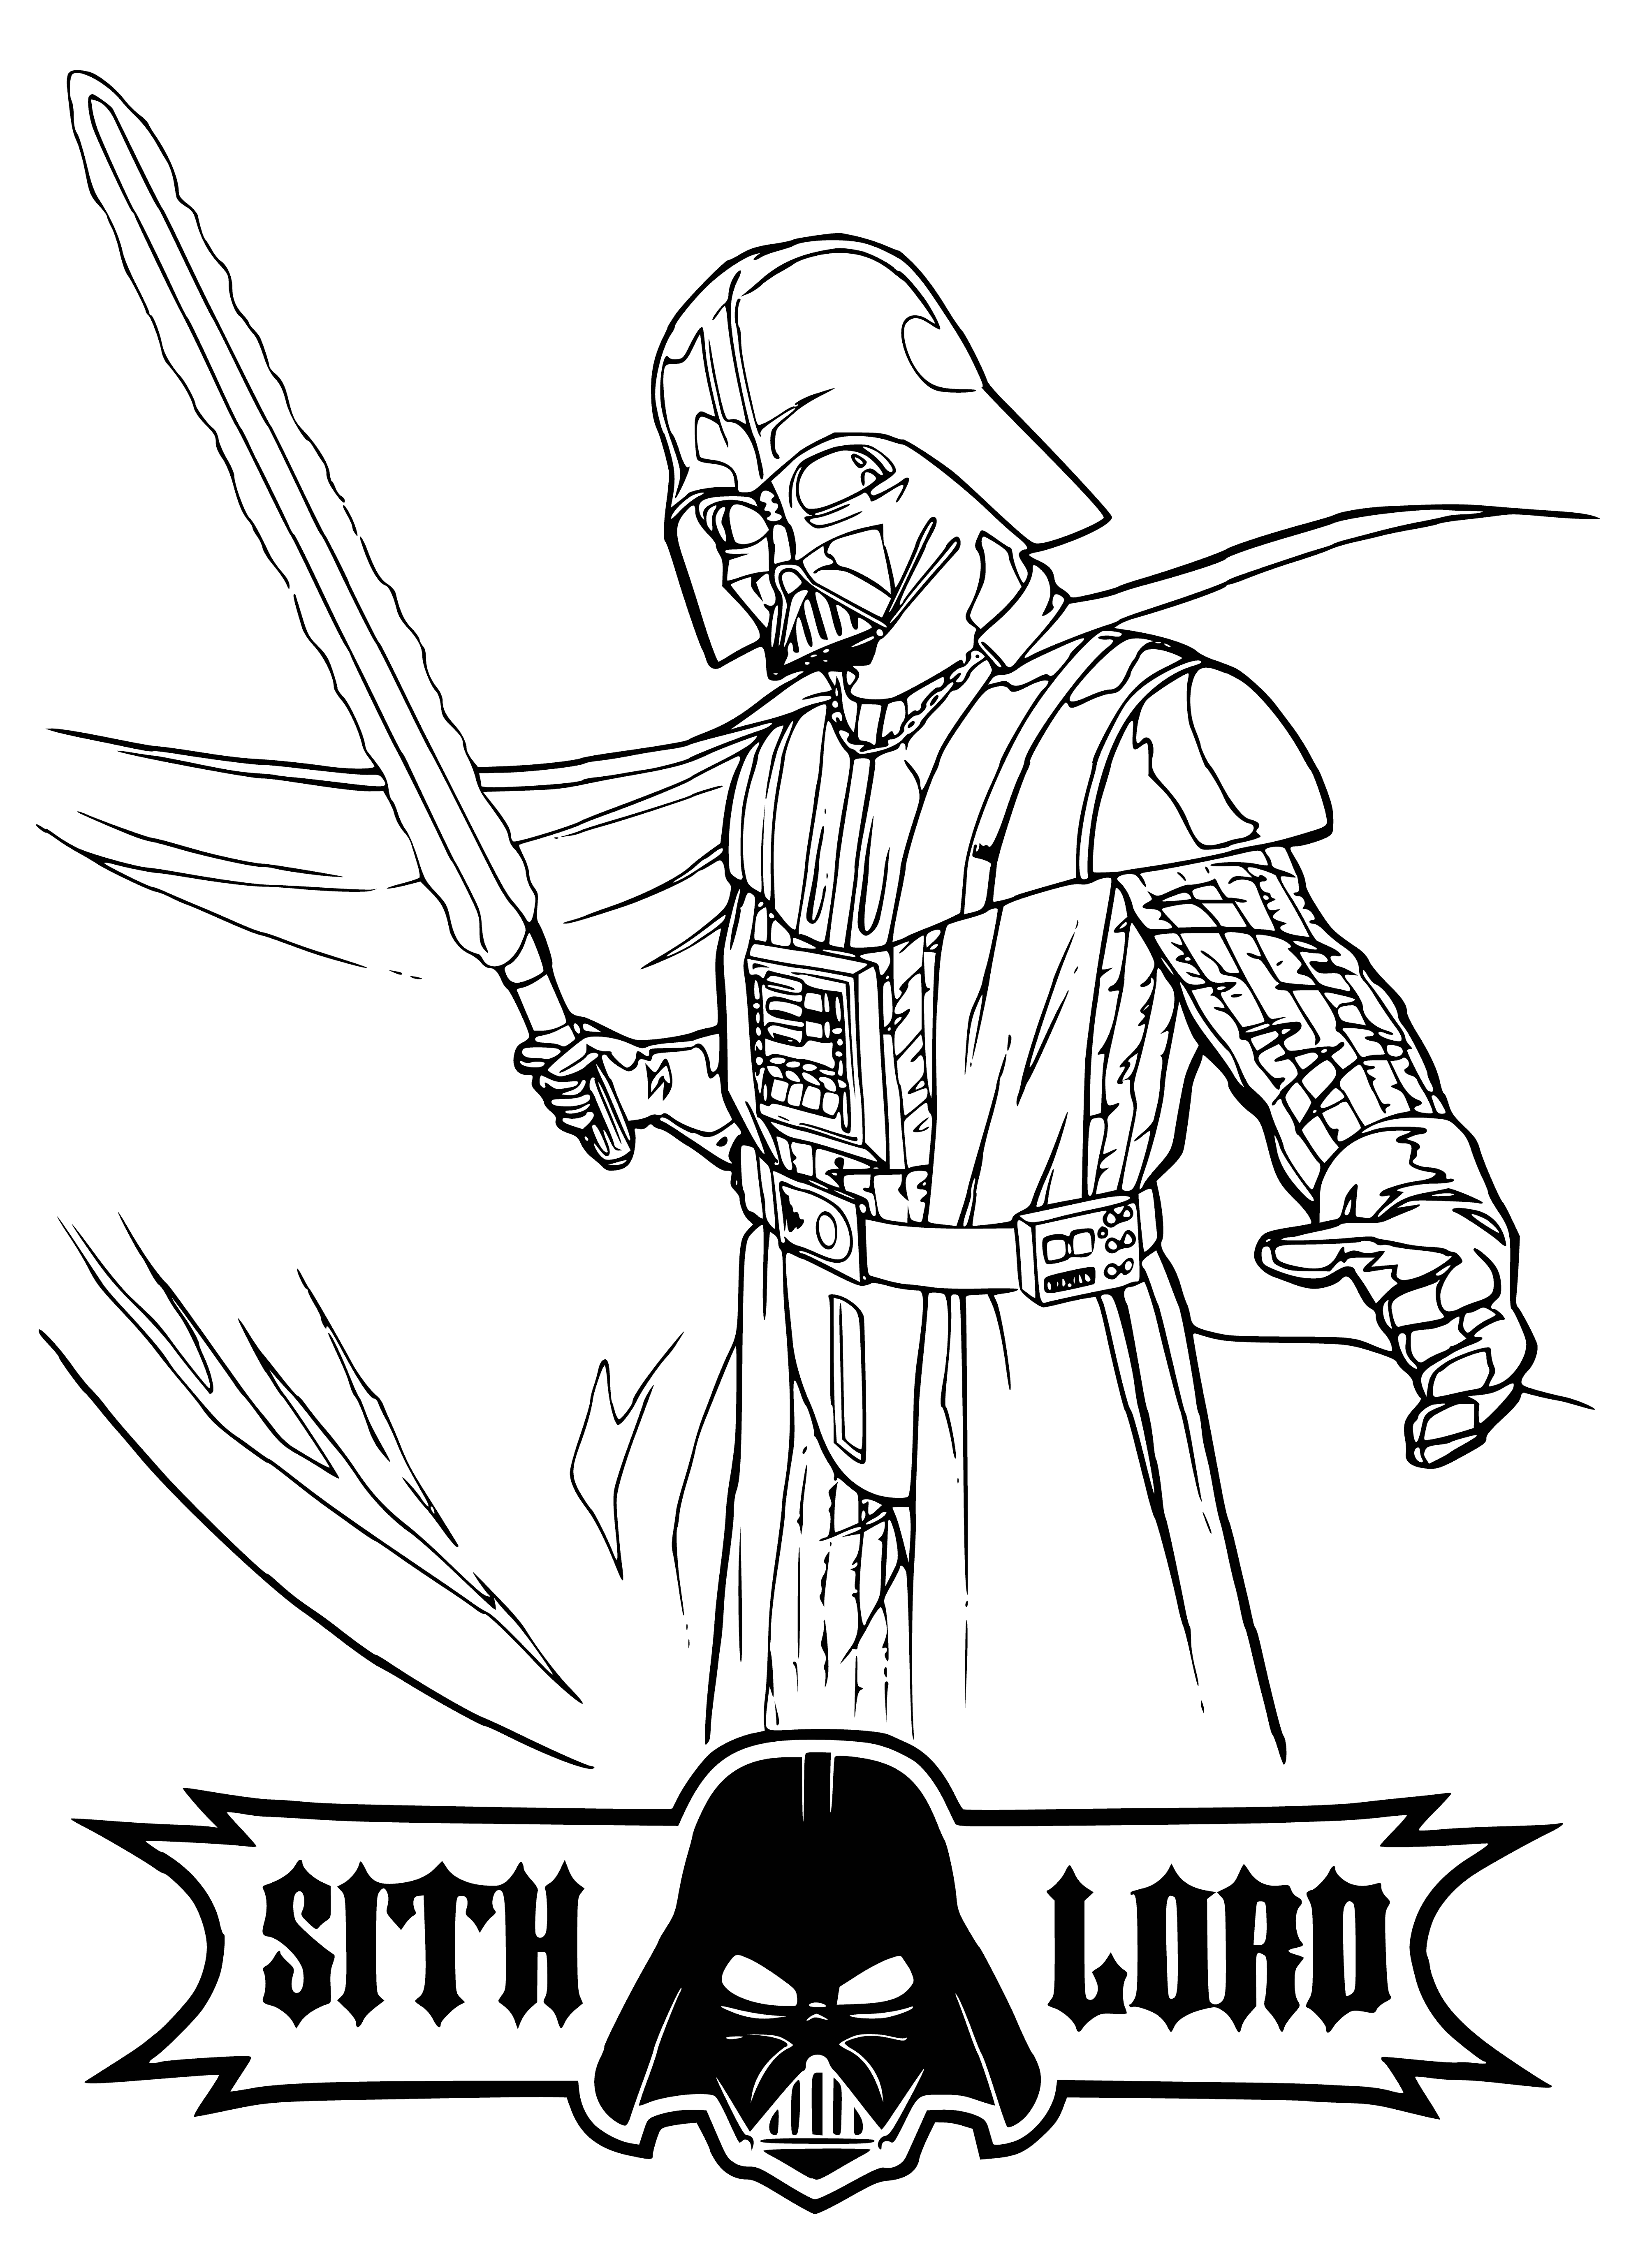 coloring page: Darth Vader, villain of the Star Wars franchise, in all black armor, holding a red lightsaber & raising his left hand in a gesture of power. Eyes glow menacing yellow.